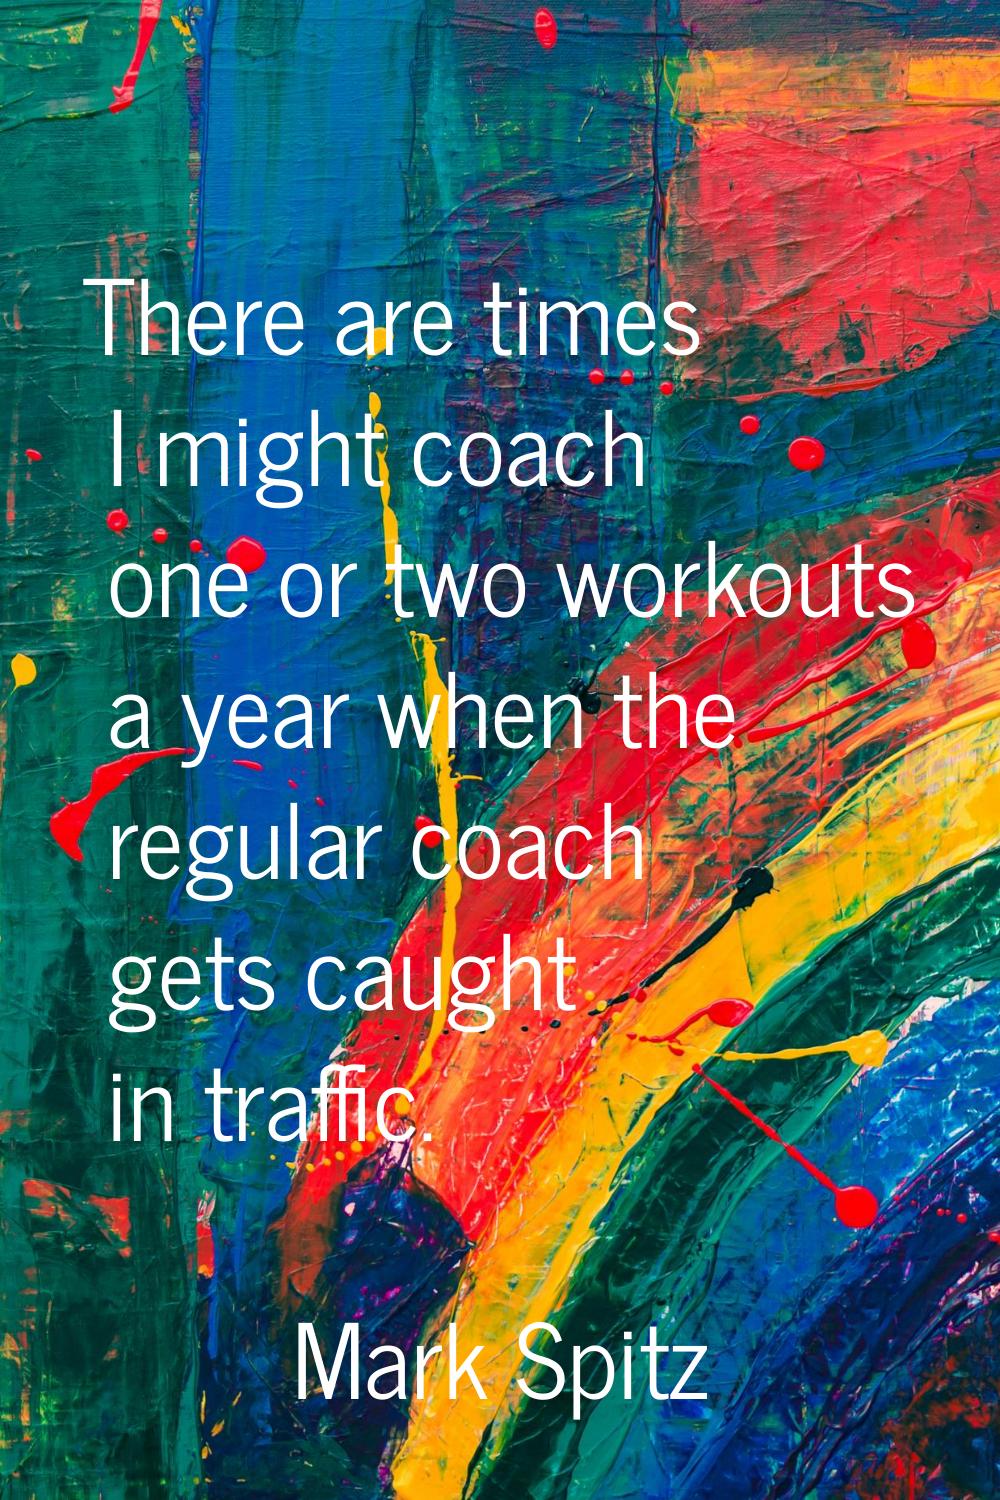 There are times I might coach one or two workouts a year when the regular coach gets caught in traf